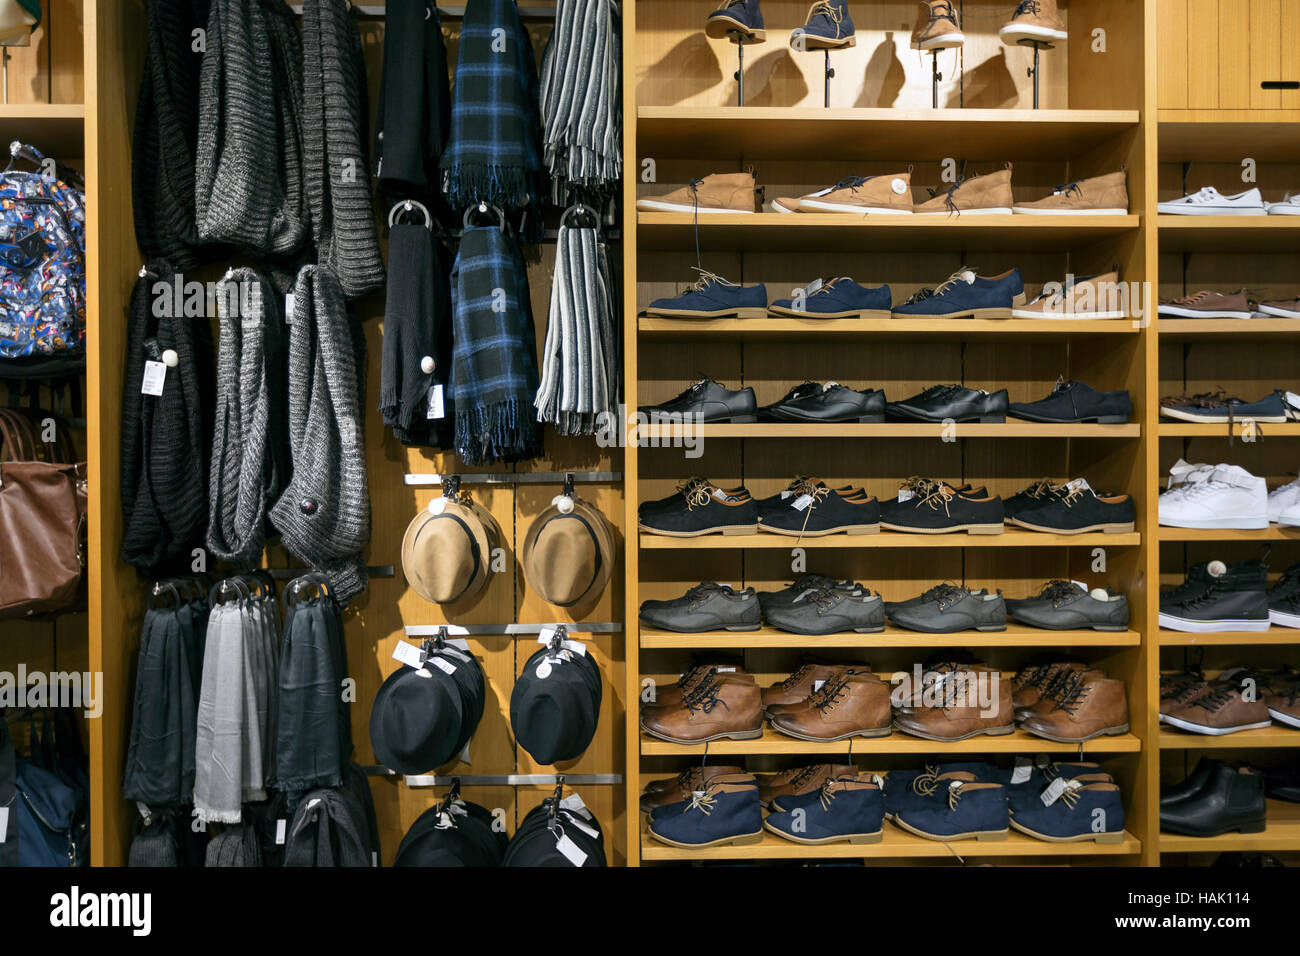 shelves with shoes and accessories in clothes shop Stock Photo